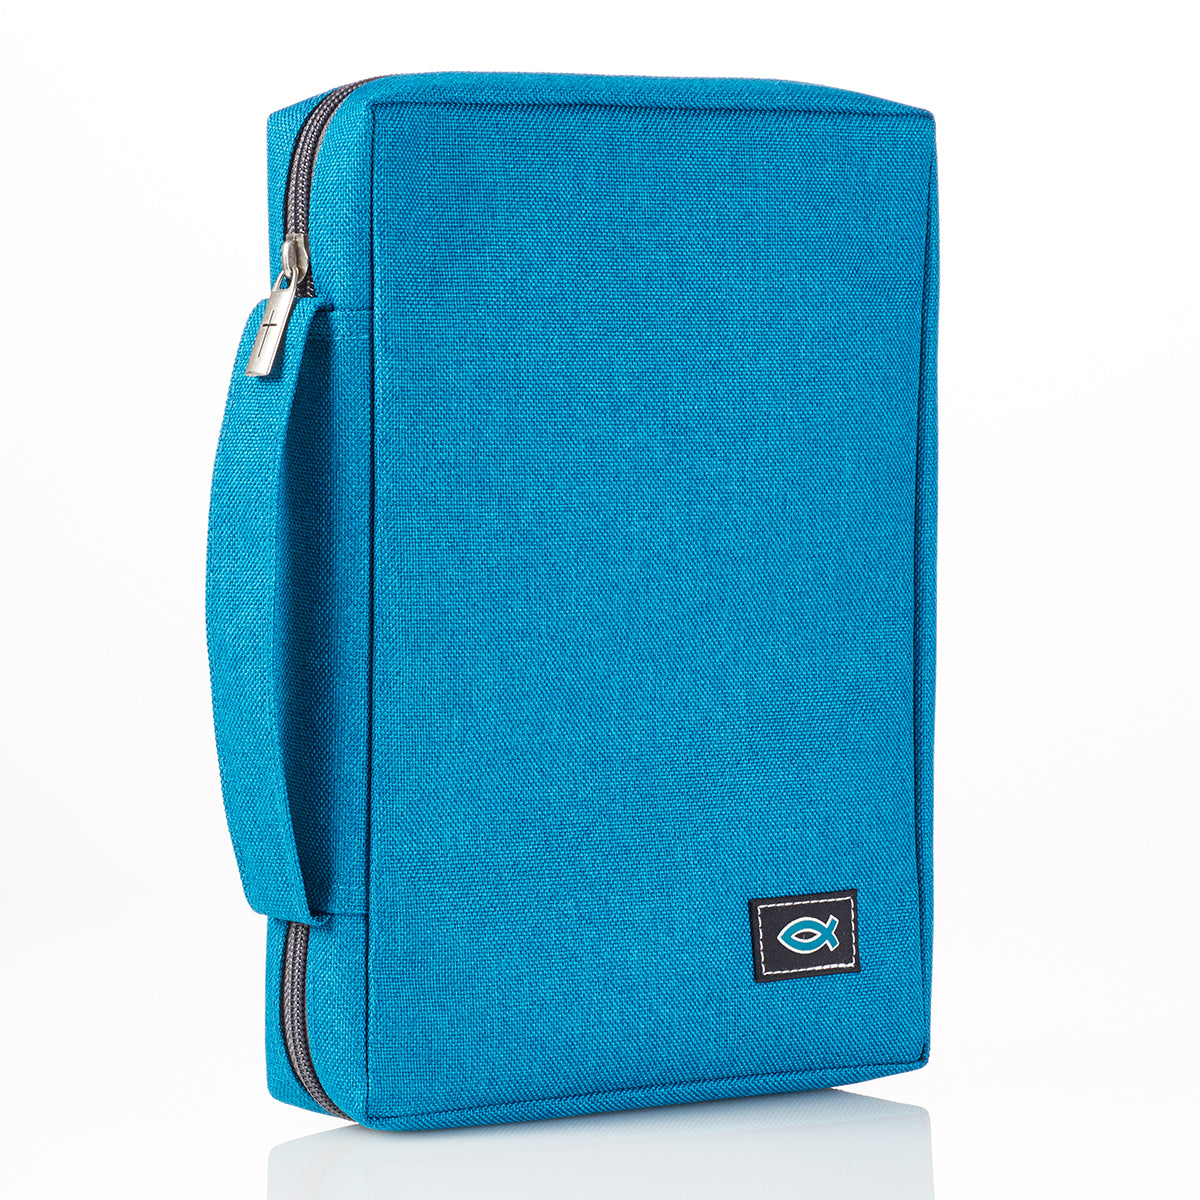 Image of Teal Poly-Canvas Value Bible Cover with Fish Badge other